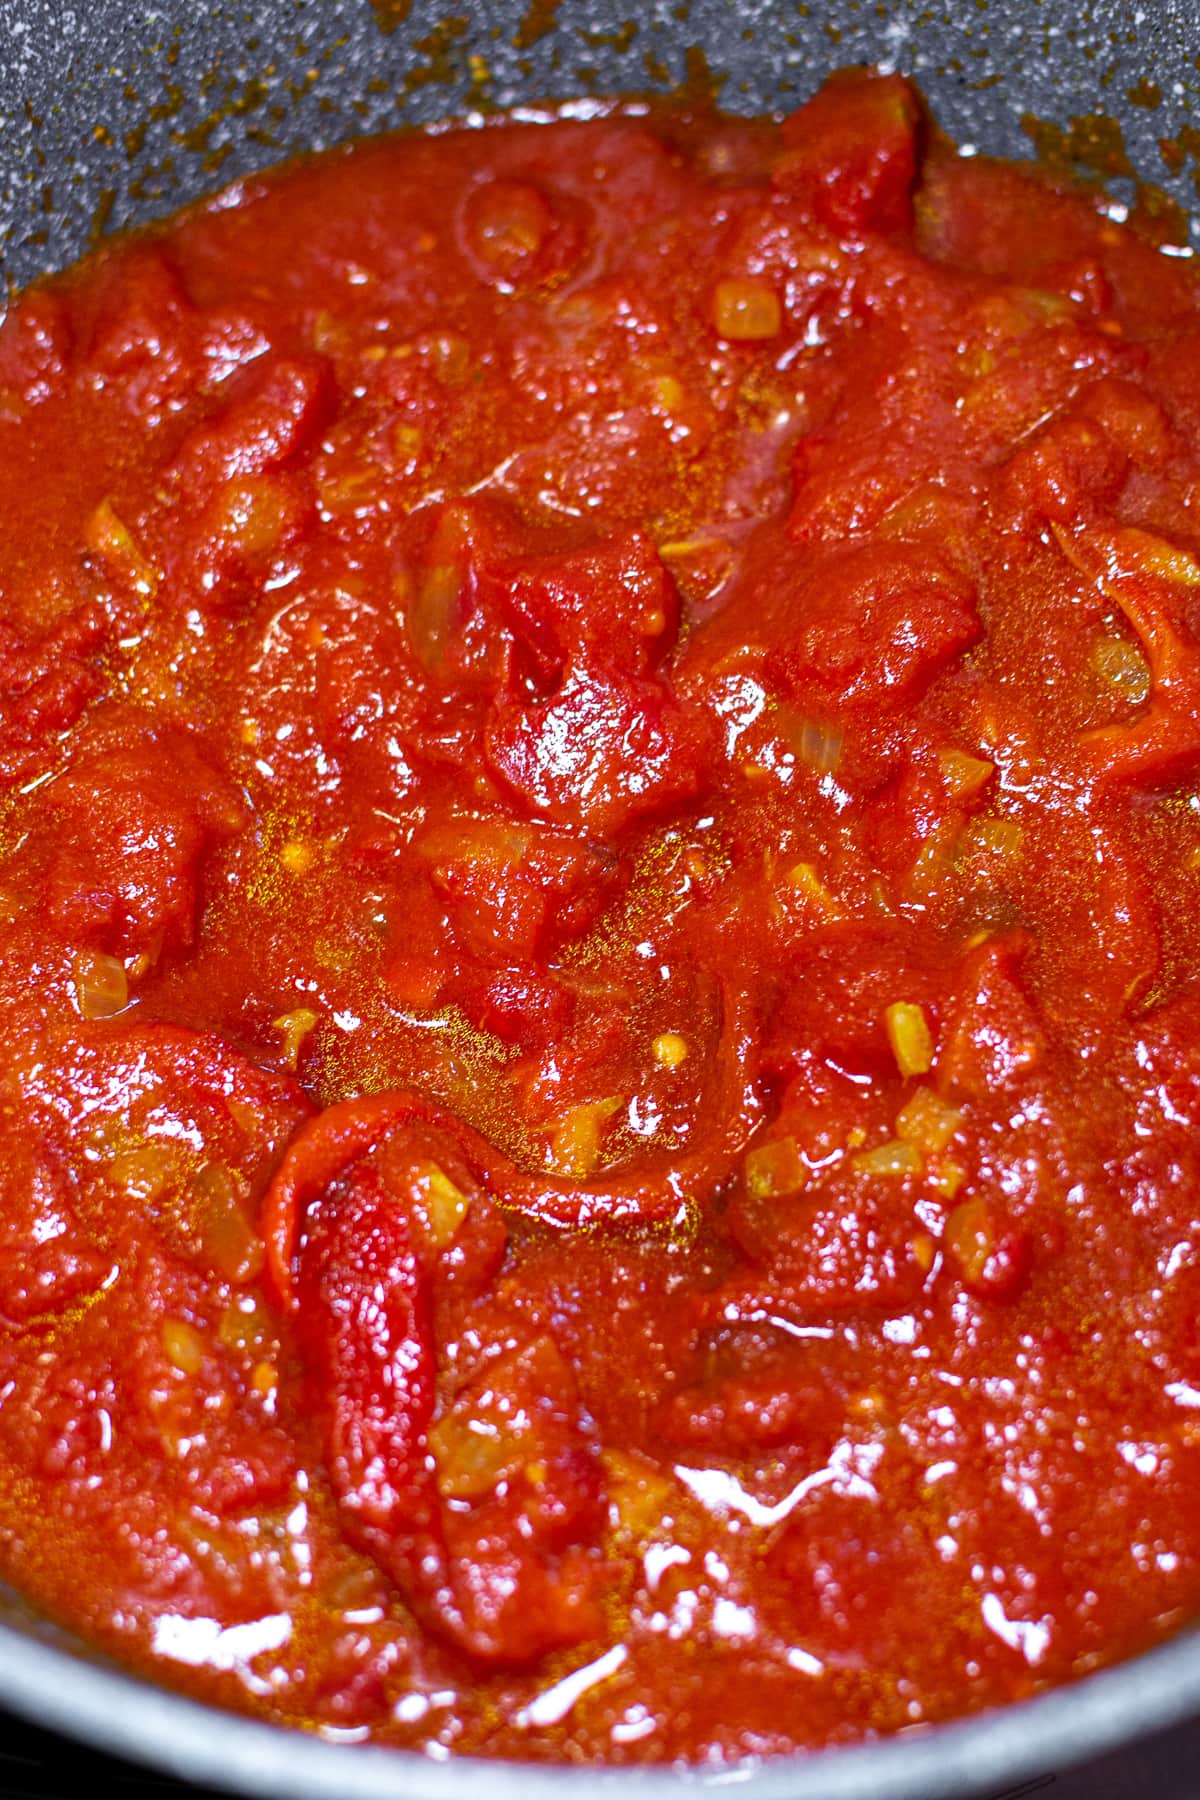 Tomato sauce with bell peppers in a gray pan.